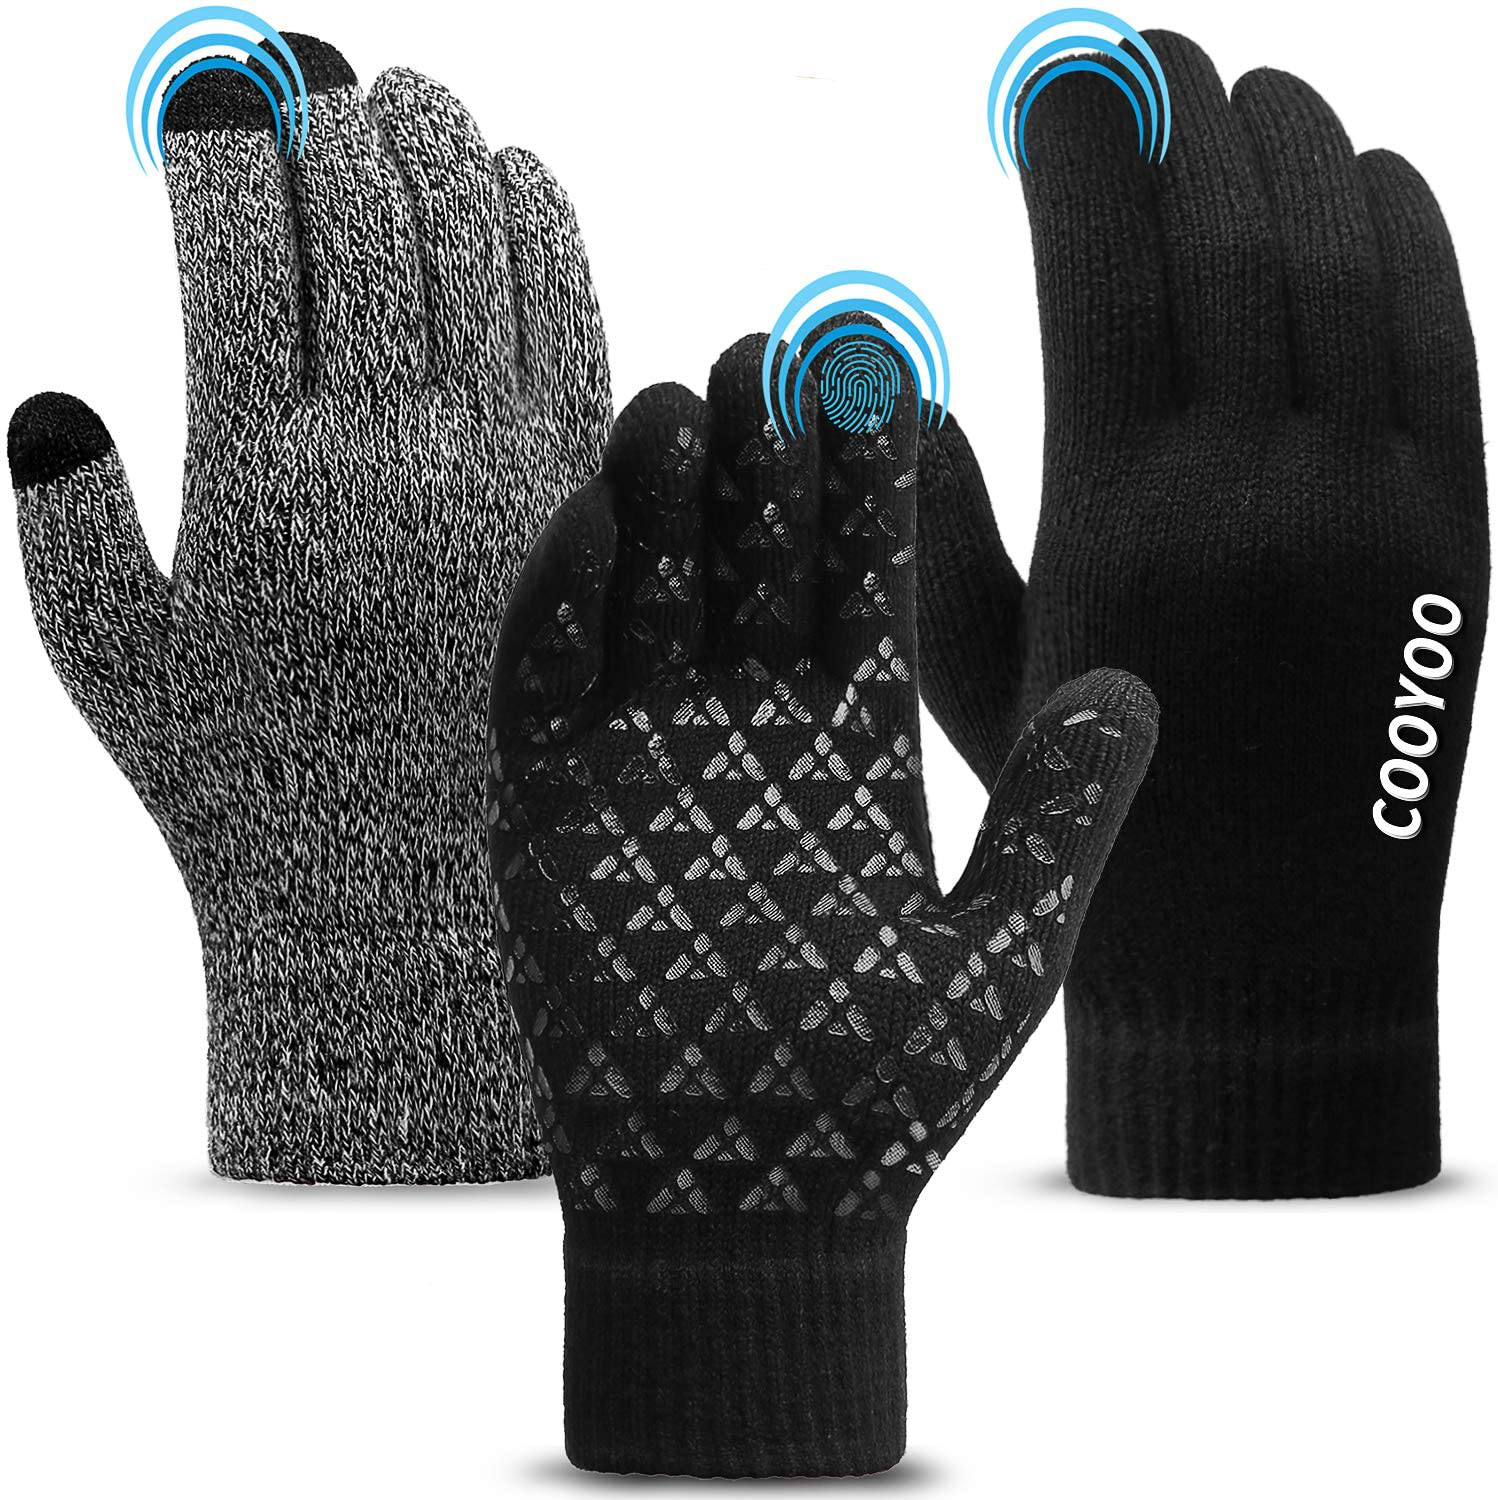 COOYOO Winter Gloves for Women and Men 1/2/3 Pairs,Upgraded Touch Screen Gloves,Anti-Slip Silicone Gel - Elastic Cuff - Thermal Soft Wool Lining - 3 Size Choice